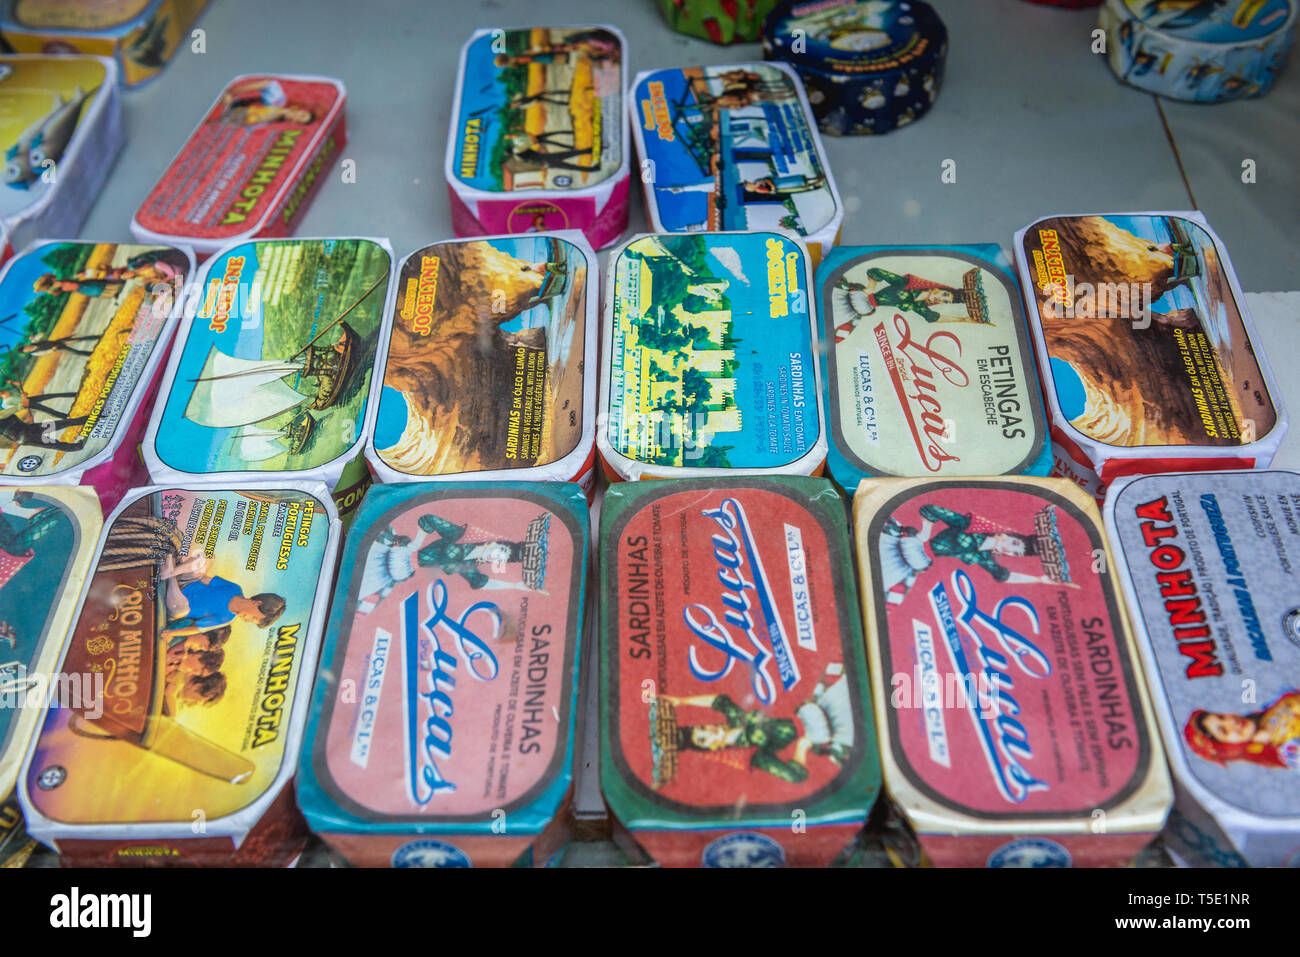 Sardine tins for sale in Alfama district of Lisbon, Portugal Stock Photo